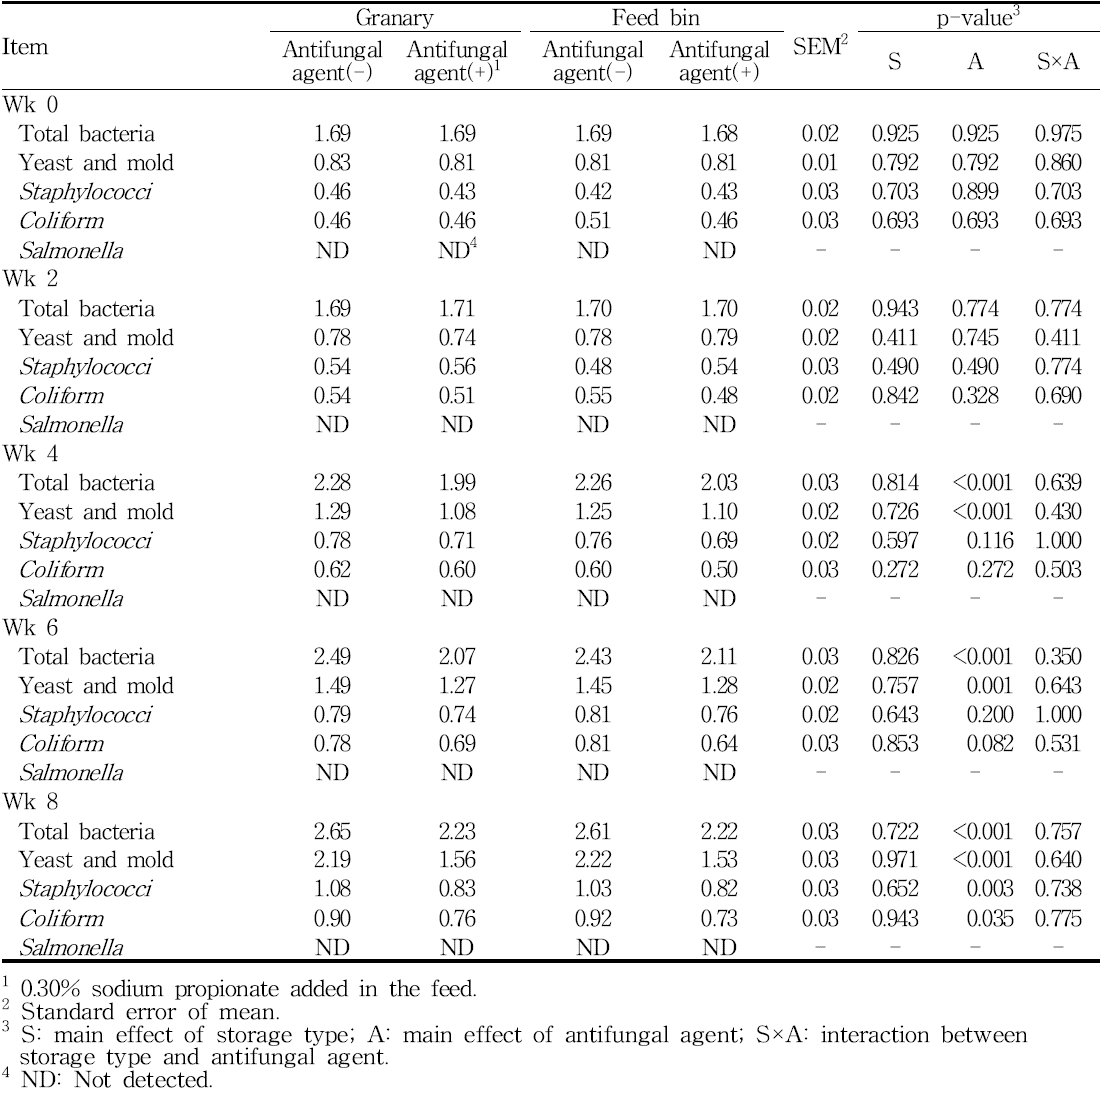 Effects of storage type and inclusion of antifungal agent on the microbial profile of growing diets